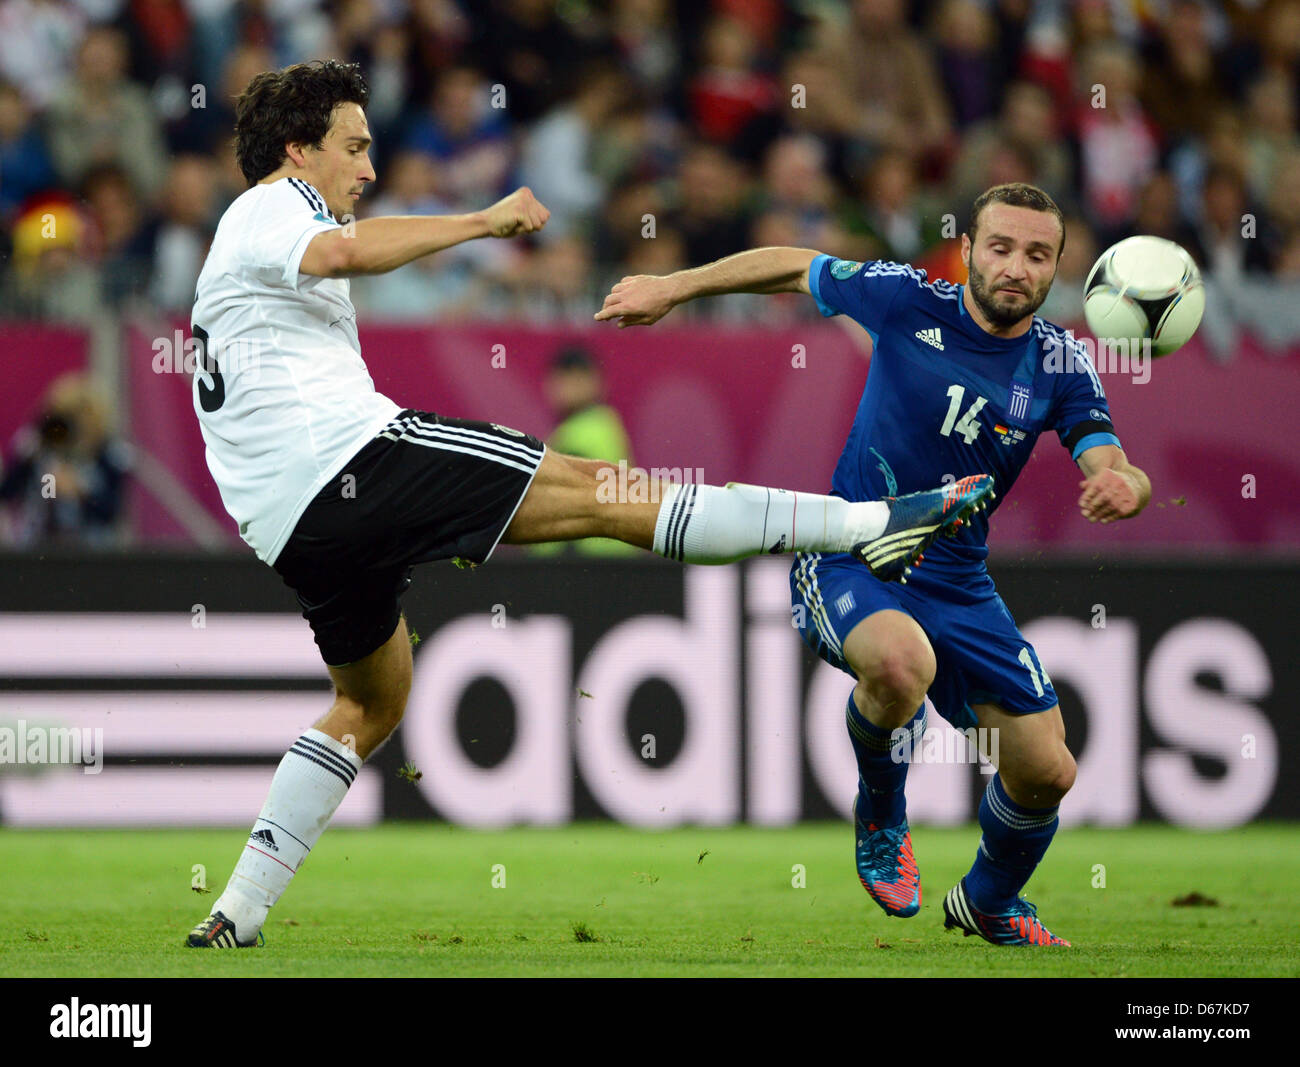 Germany's Mats Hummels (L) vies for the ball with Greece's Dimitrios Salpingidis during UEFA EURO 2012 quarter- final soccer match Germany vs Greece at Arena Gdansk in Gdansk, Poland, 22 June 2012. Photo: Andreas Gebert dpa (Please refer to chapters 7 and 8 of http://dpaq.de/Ziovh for UEFA Euro 2012 Terms & Conditions)  +++(c) dpa - Bildfunk+++ Stock Photo